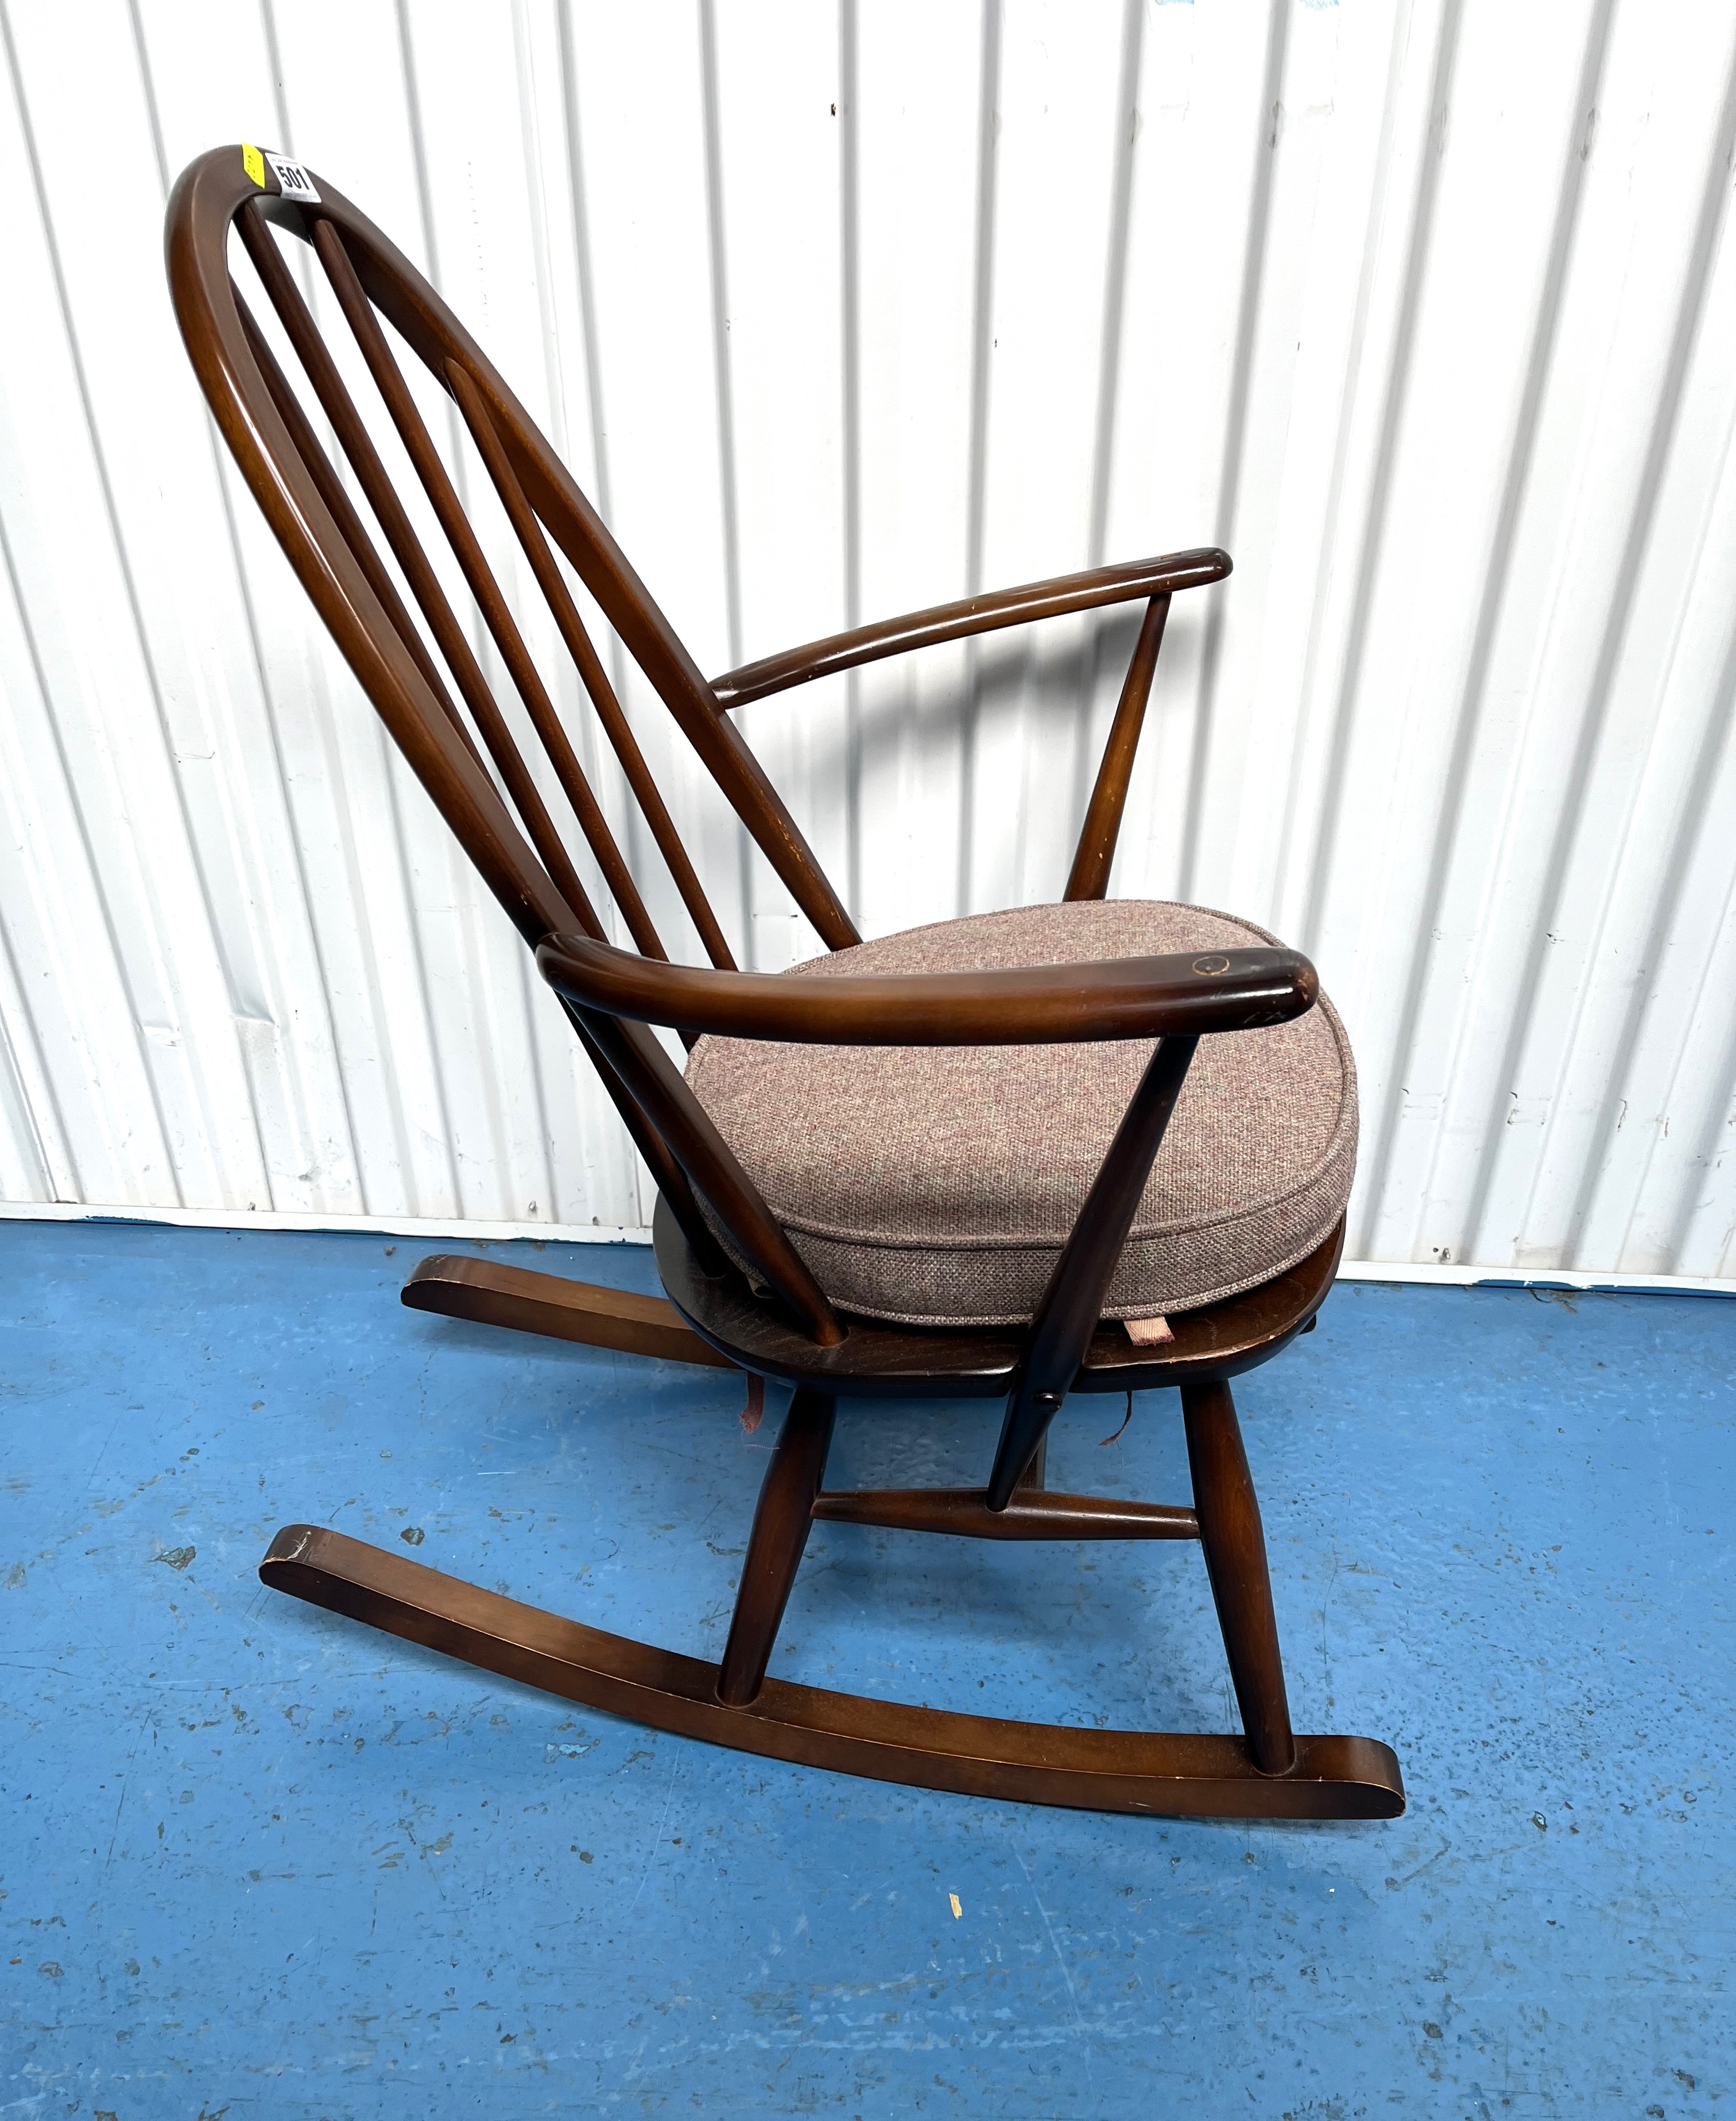 Ercol style rocking chair - Image 6 of 6